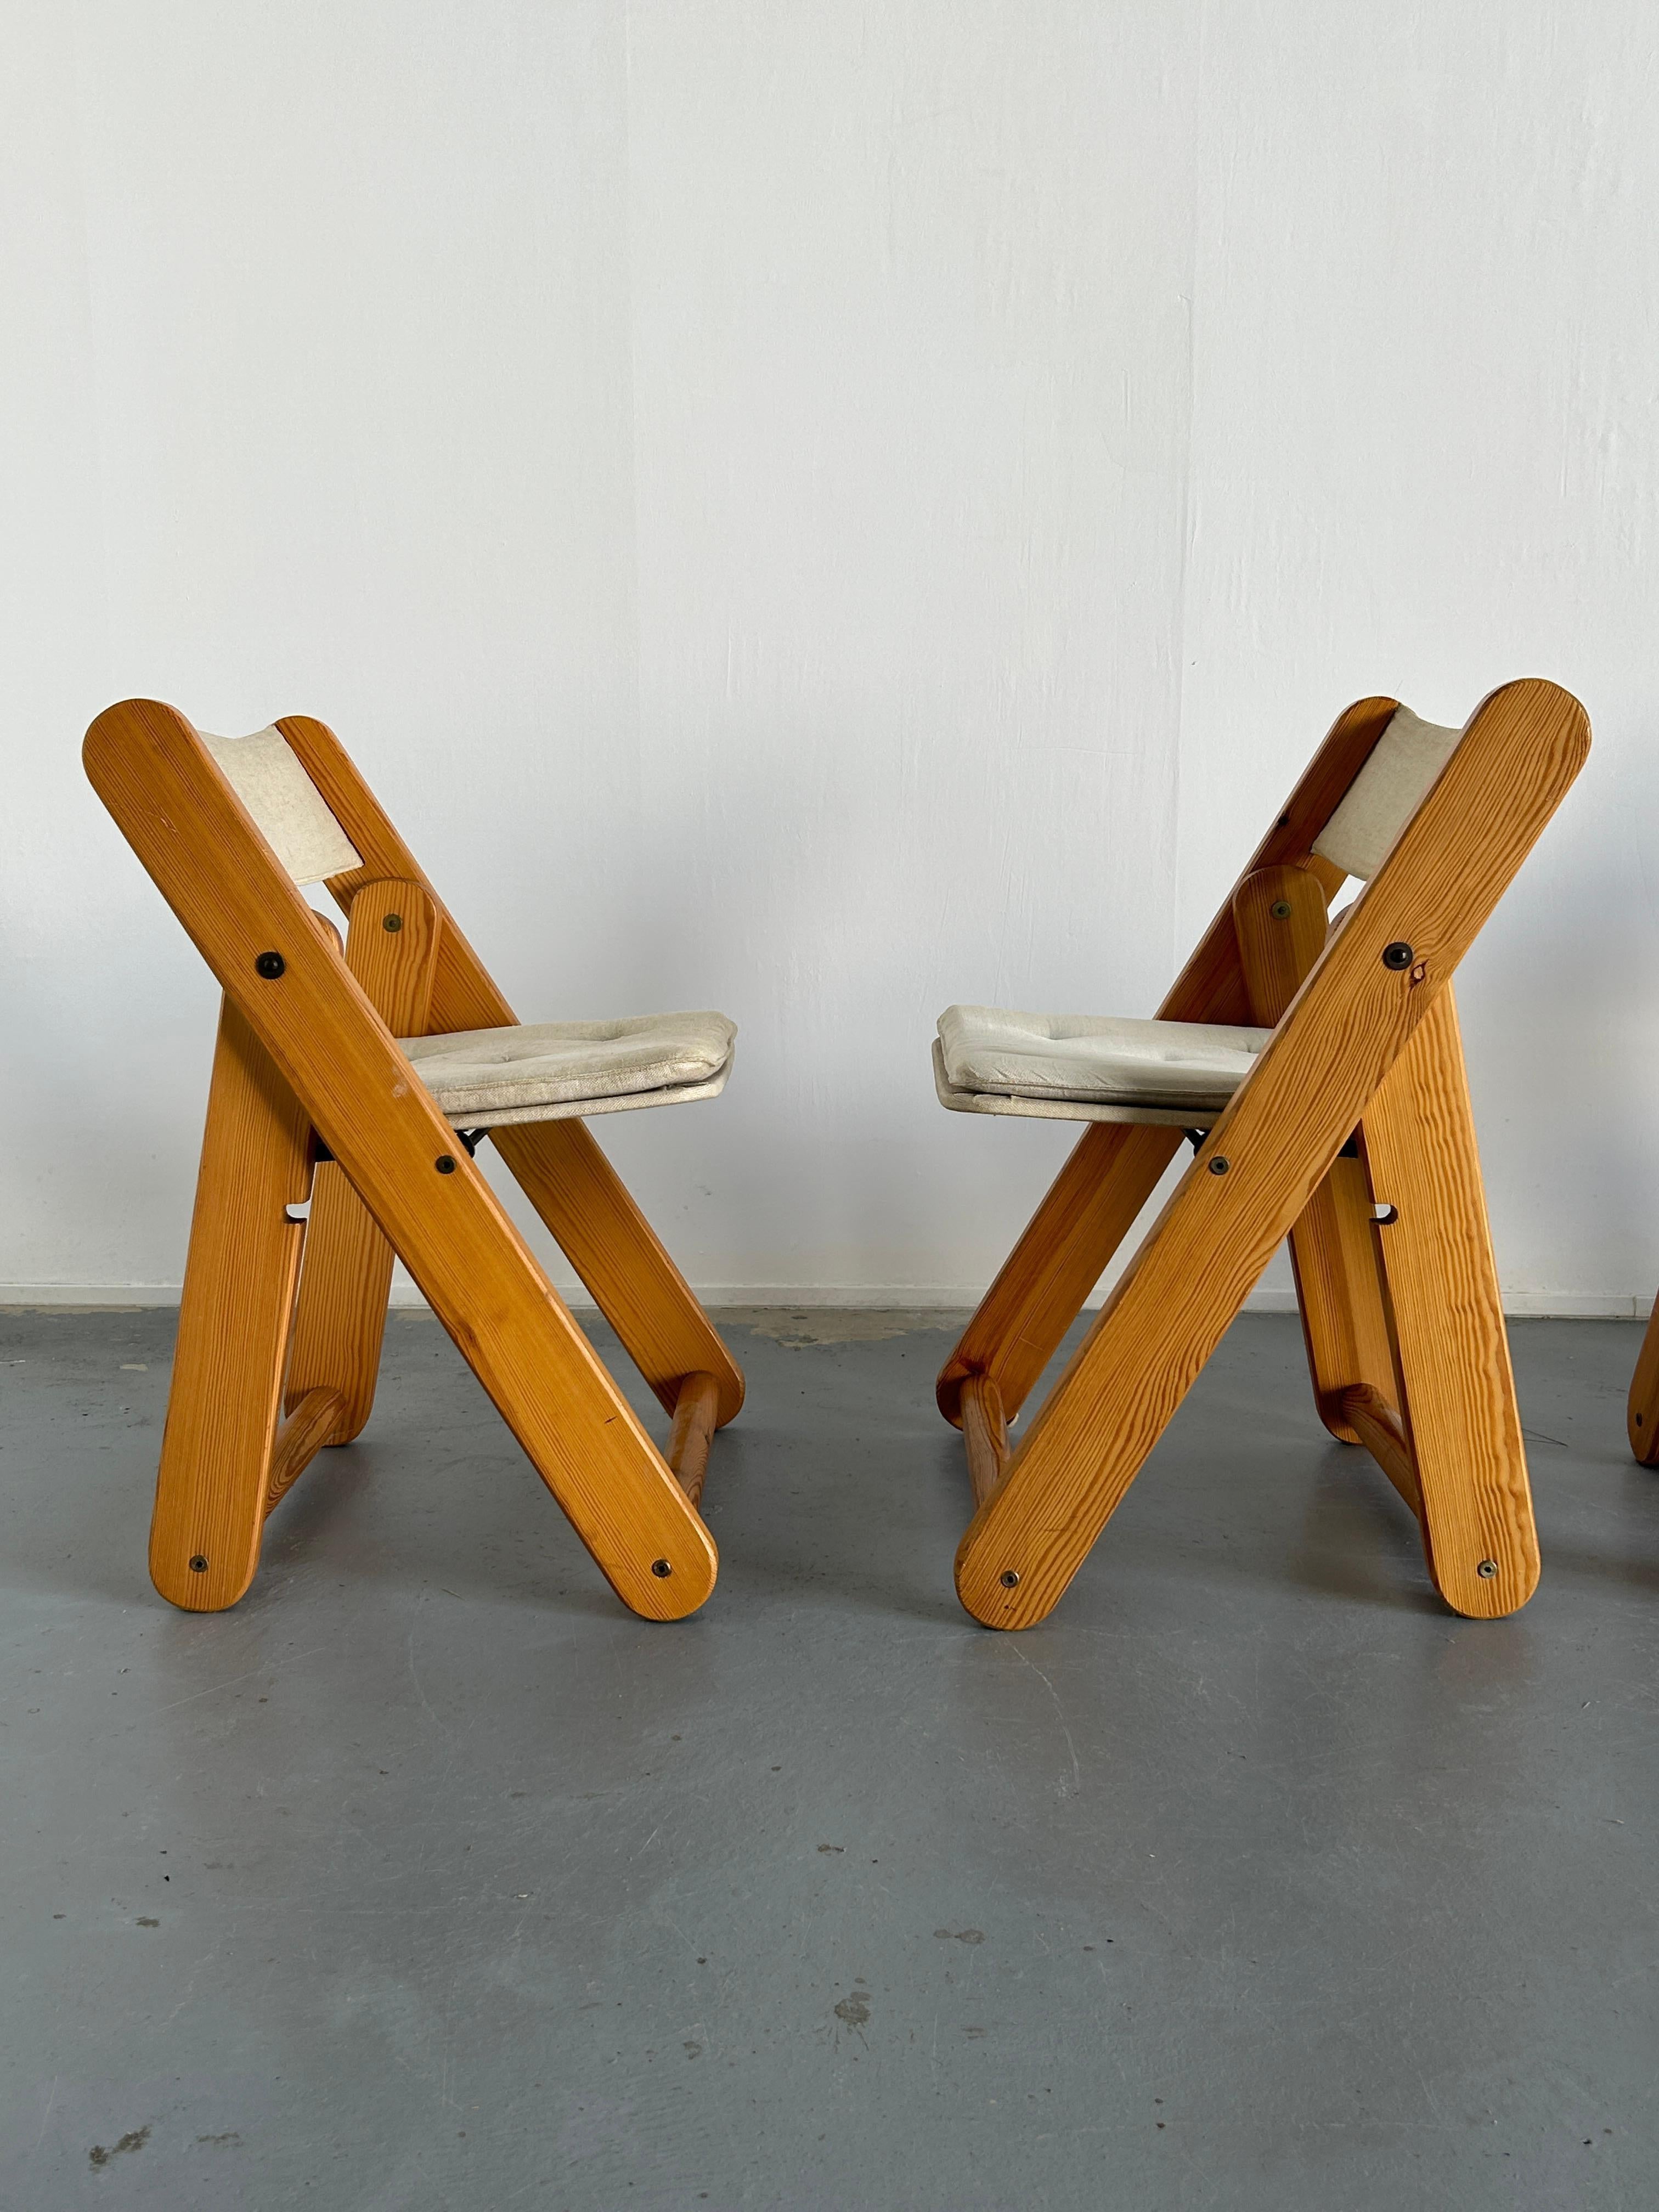 Late 20th Century Vintage Solid Pine Kon-Tiki Folding Chairs by Gillis Lundgren for IKEA, Set of 4